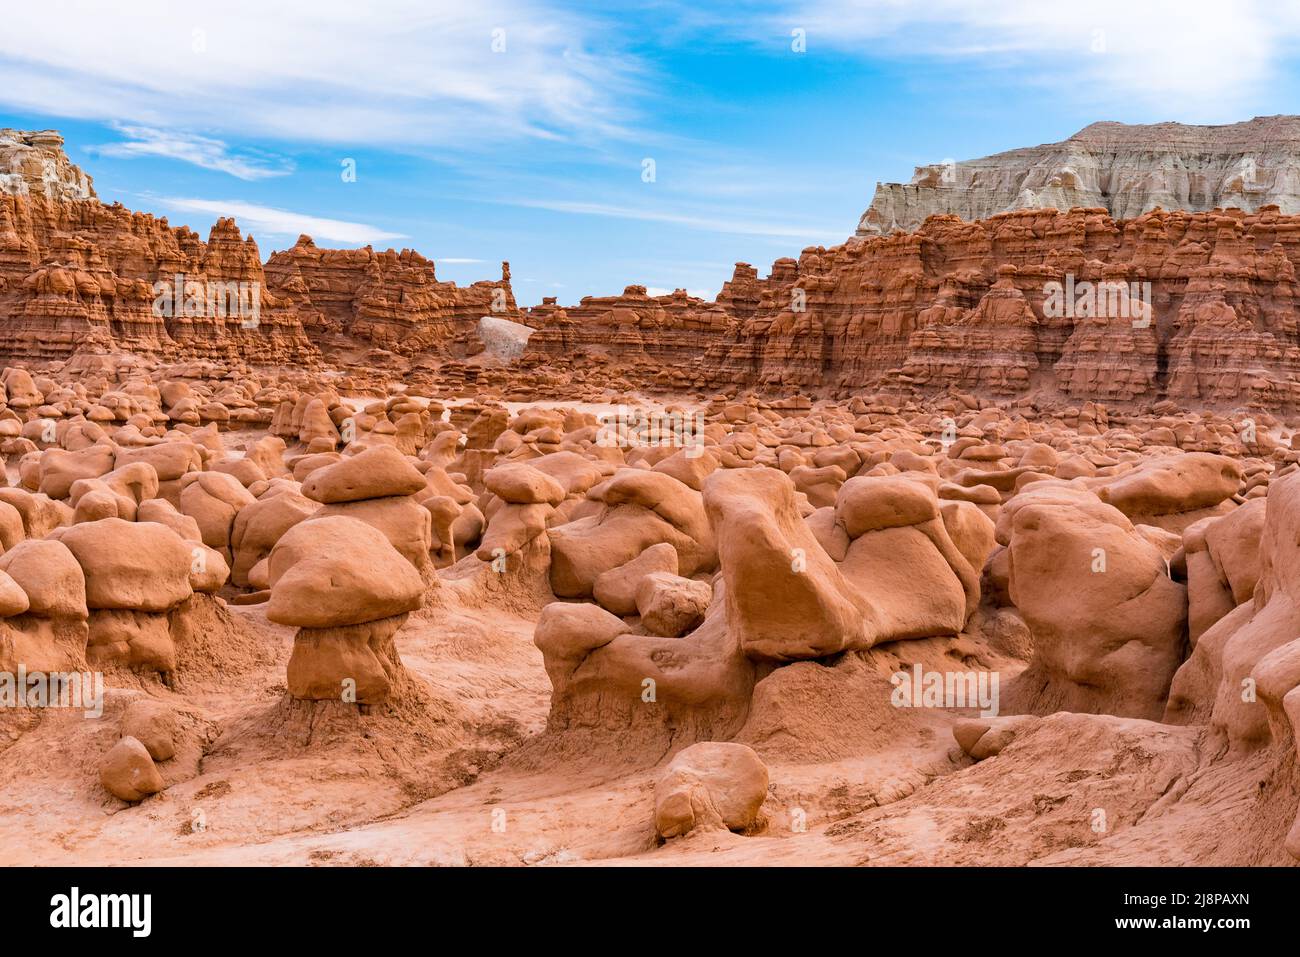 Amazing Hoodoo Rock Formations at Goblin Valley State Park in Utah Stock Photo